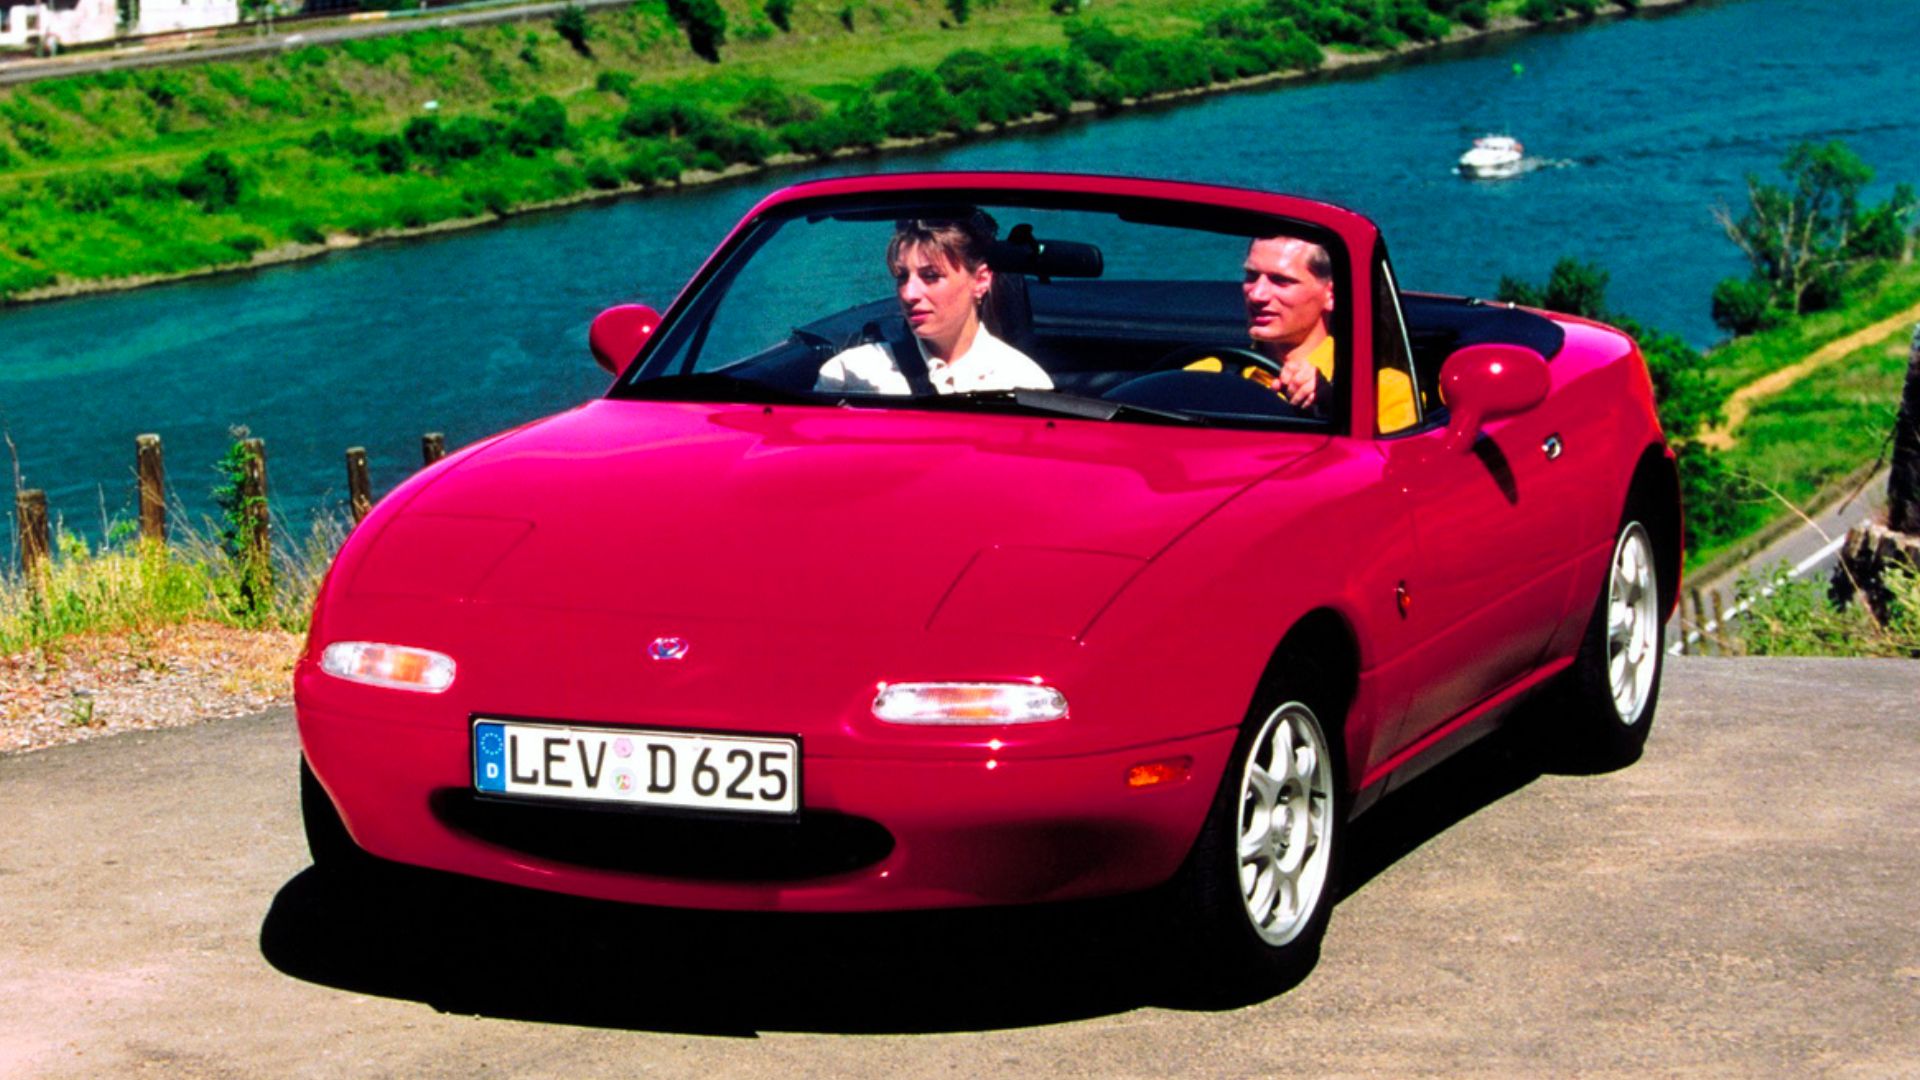 Cool project car options you must buy: Mazda MX-5